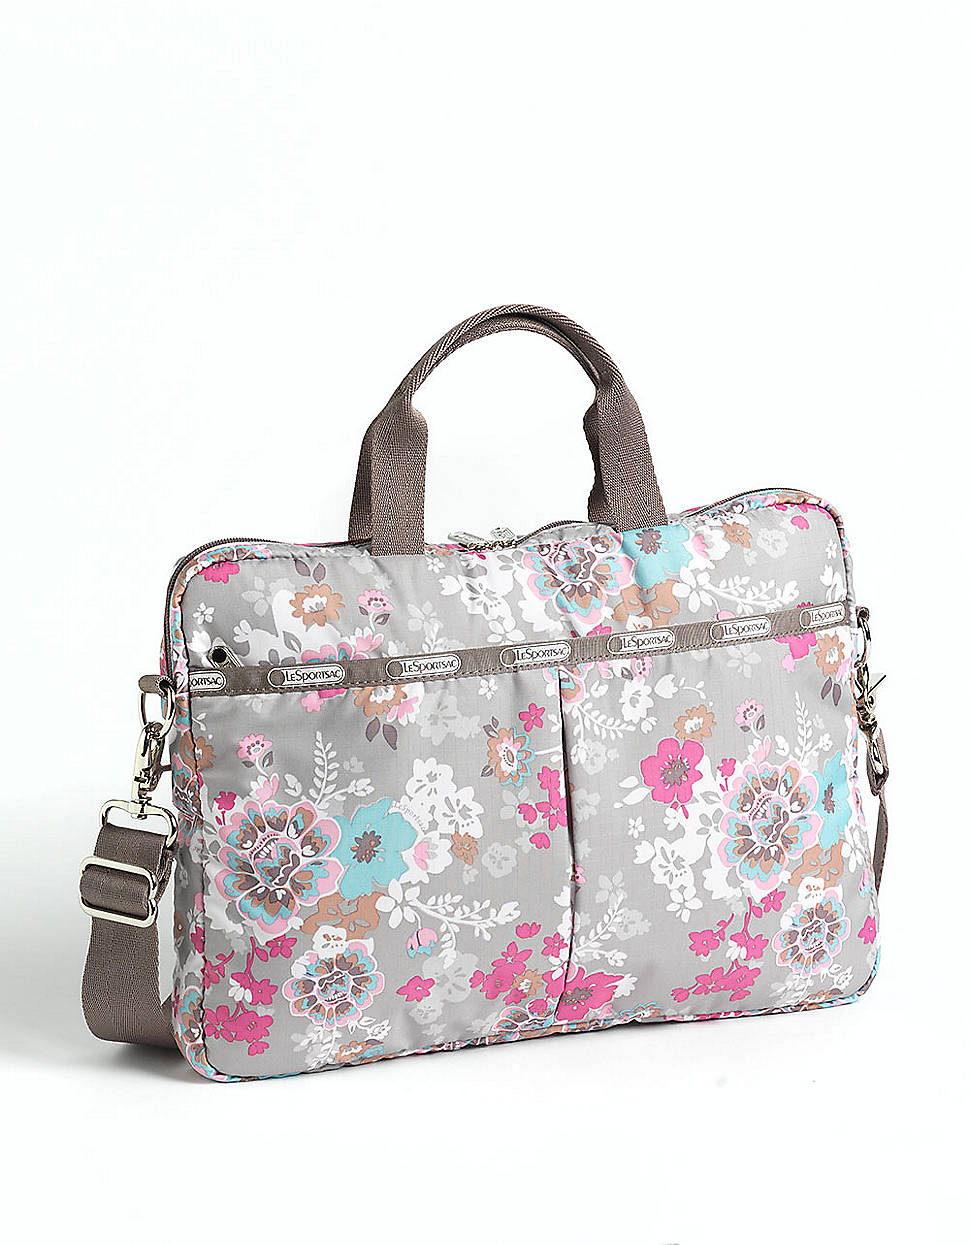 Lyst - Lesportsac Floral Print Laptop Bag in Pink